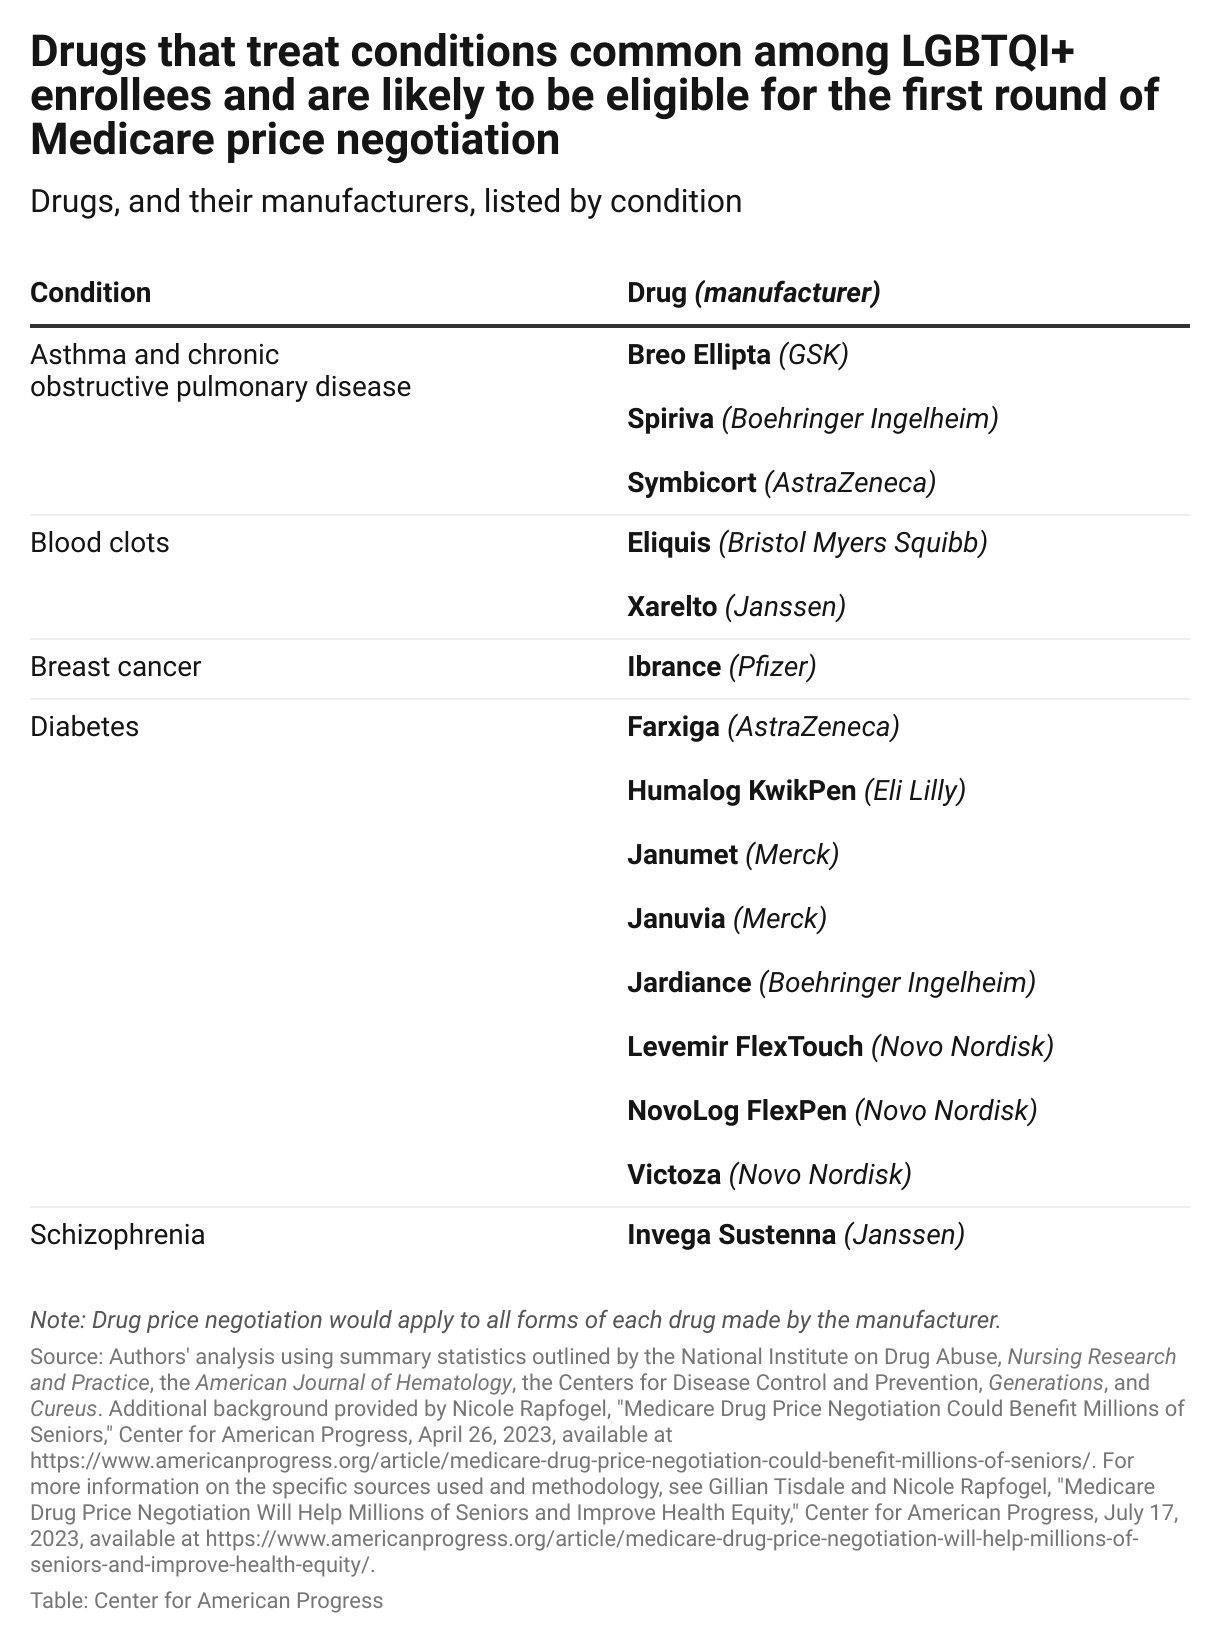 List of drugs likely to be eligible for Medicare price negotiation that treat conditions common among LGBTQI+ enrollees, including asthma and chronic obstructive pulmonary disease, blood clots, breast cancer, diabetes, and schizophrenia.